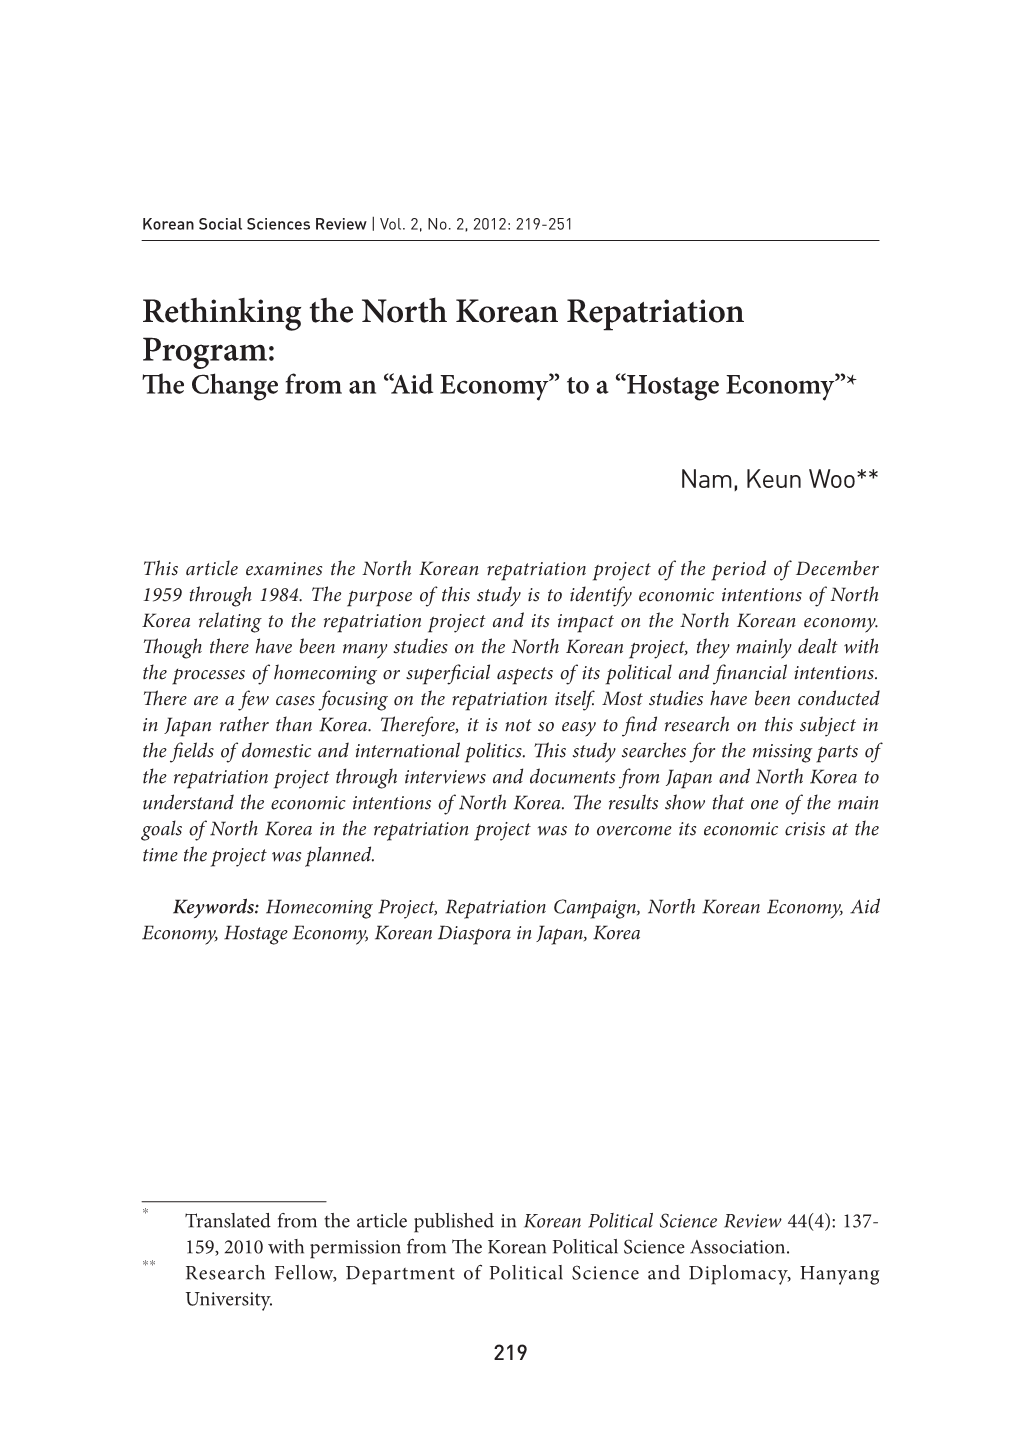 Rethinking the North Korean Repatriation Program: the Change from an “Aid Economy” to a “Hostage Economy”*